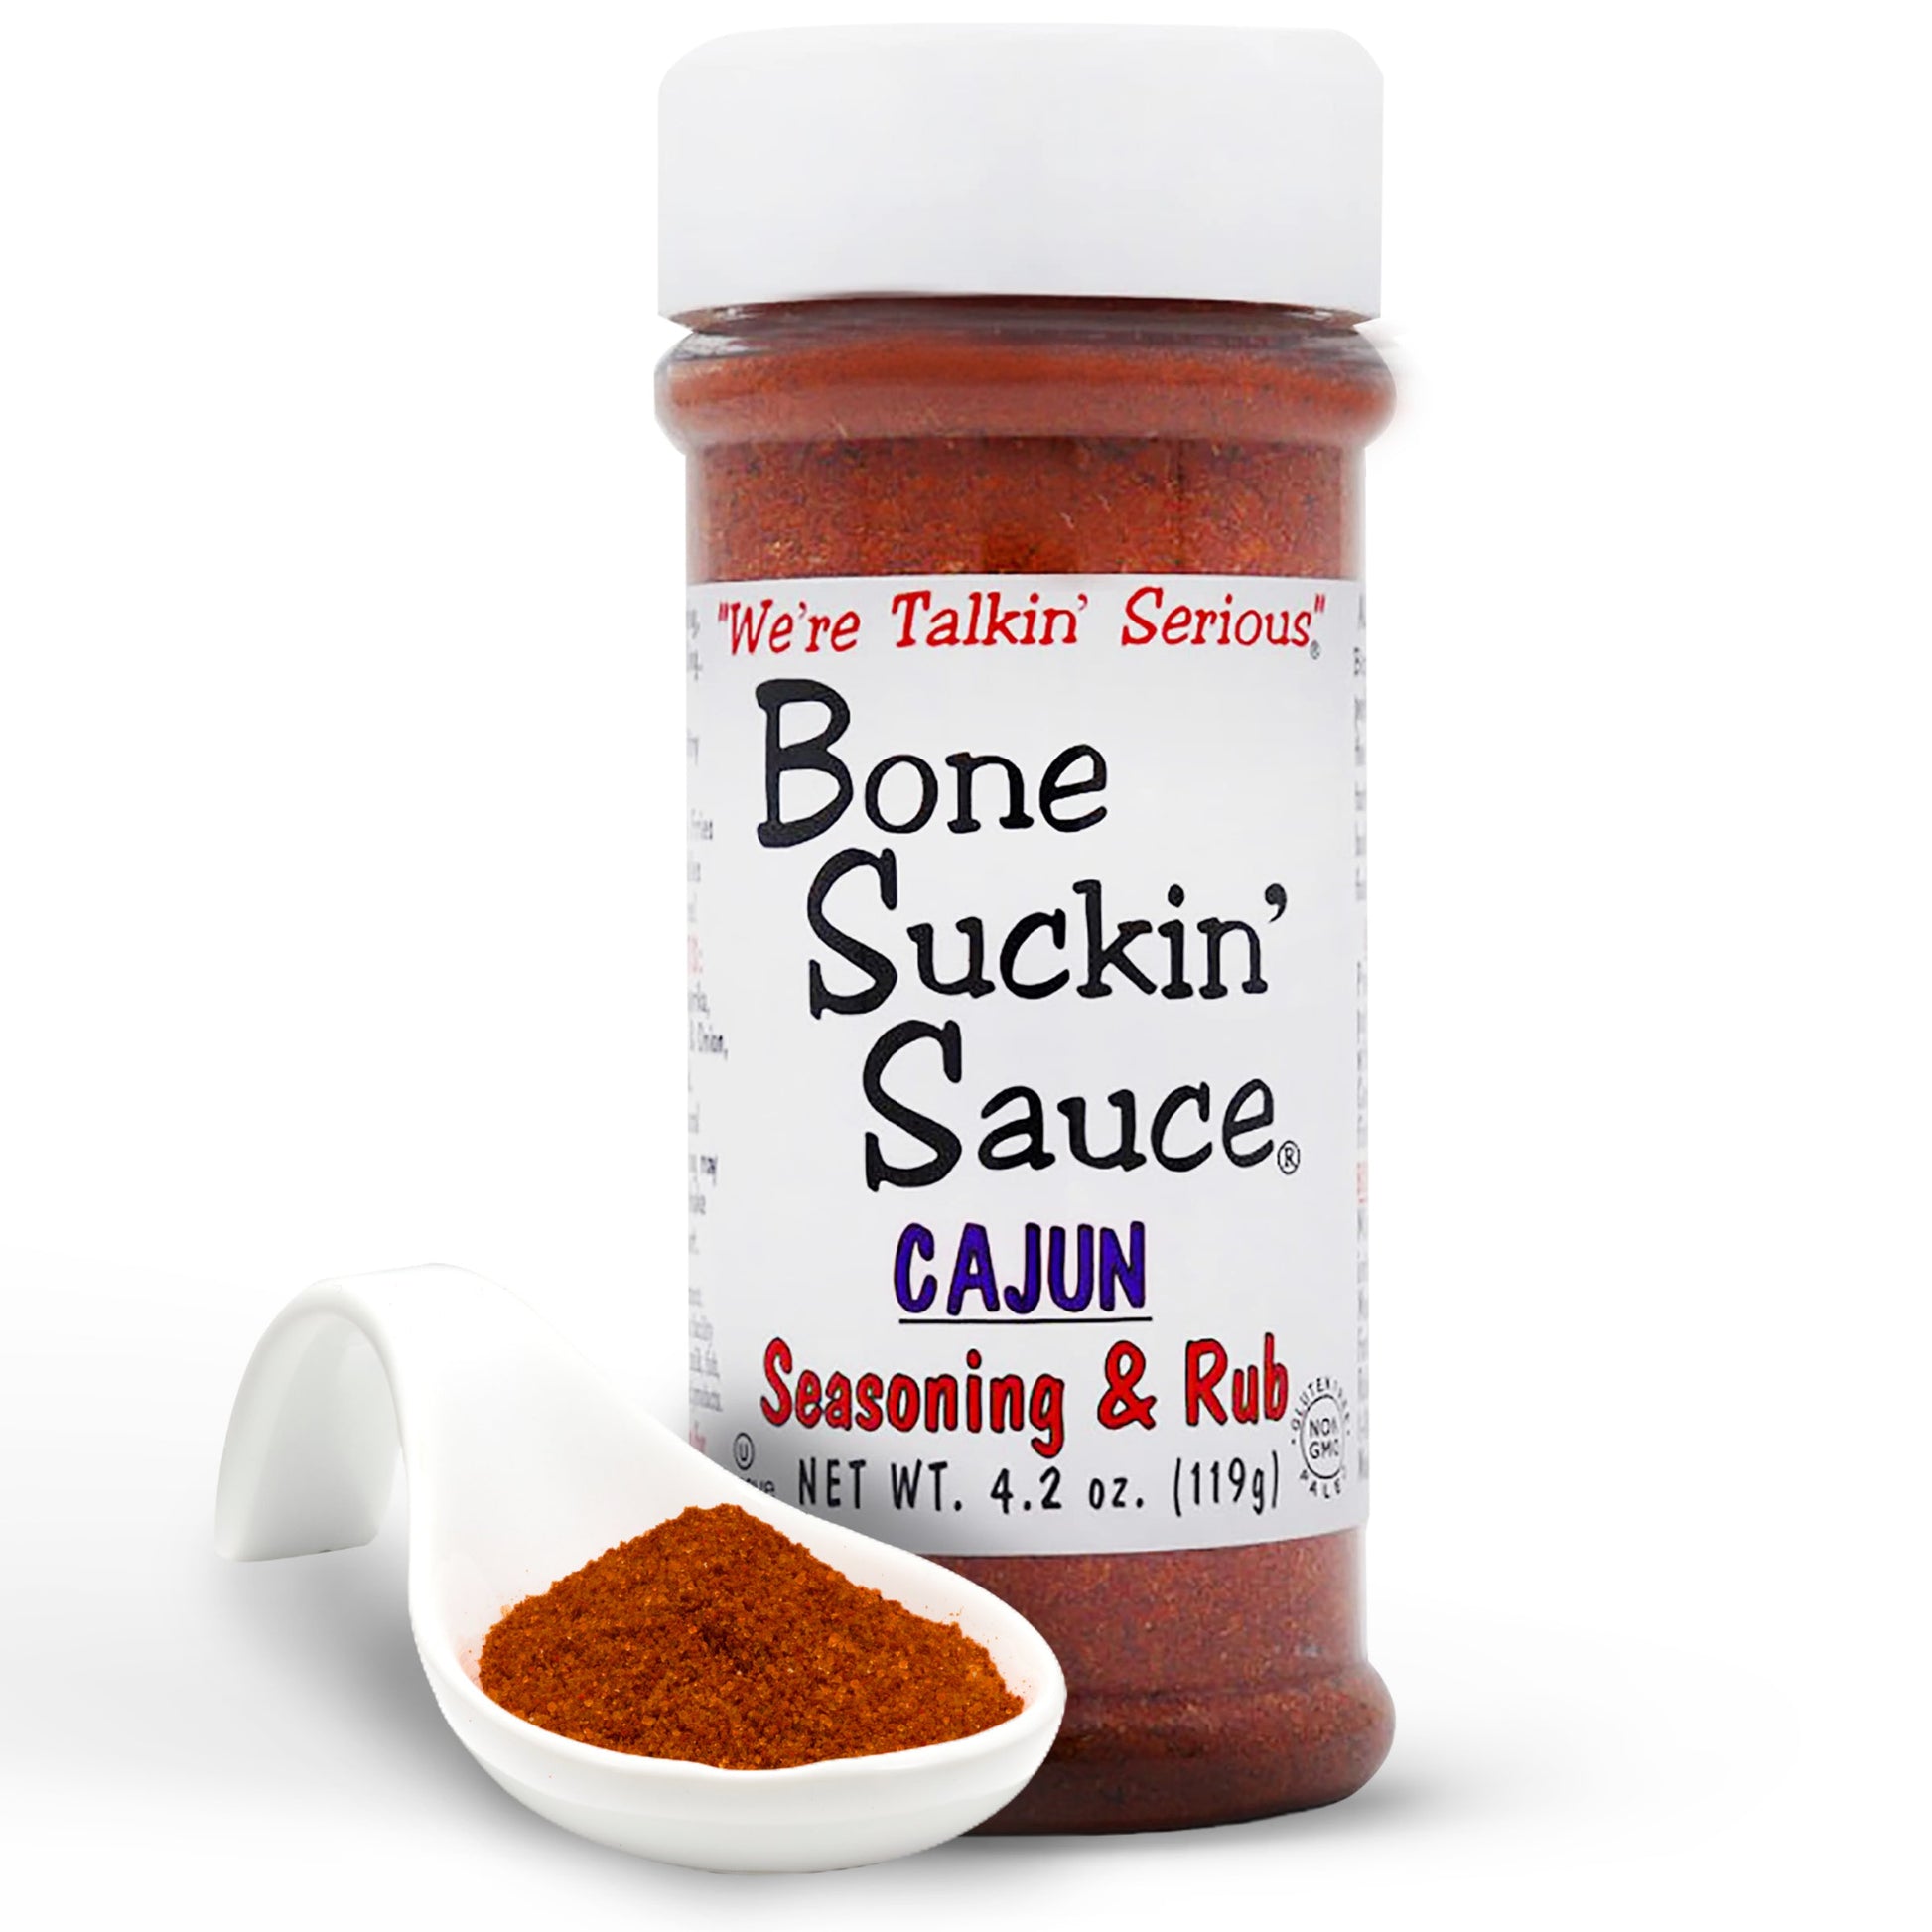 Bone Suckin'® Cajun Seasoning & Rub, 4.2 oz., is the perfect blend of Cajun spices & herbs along with the right amount of heat. It makes your food taste great, gets friends talking & coming back for more! Use generously & your Cajun food will be "Bone Suckin'® Good!" Use On Seafood, Poultry, Steaks, Pork, Pasta, French Fries, Rice, Vegetables, Gumbos, Jambalayas & more!